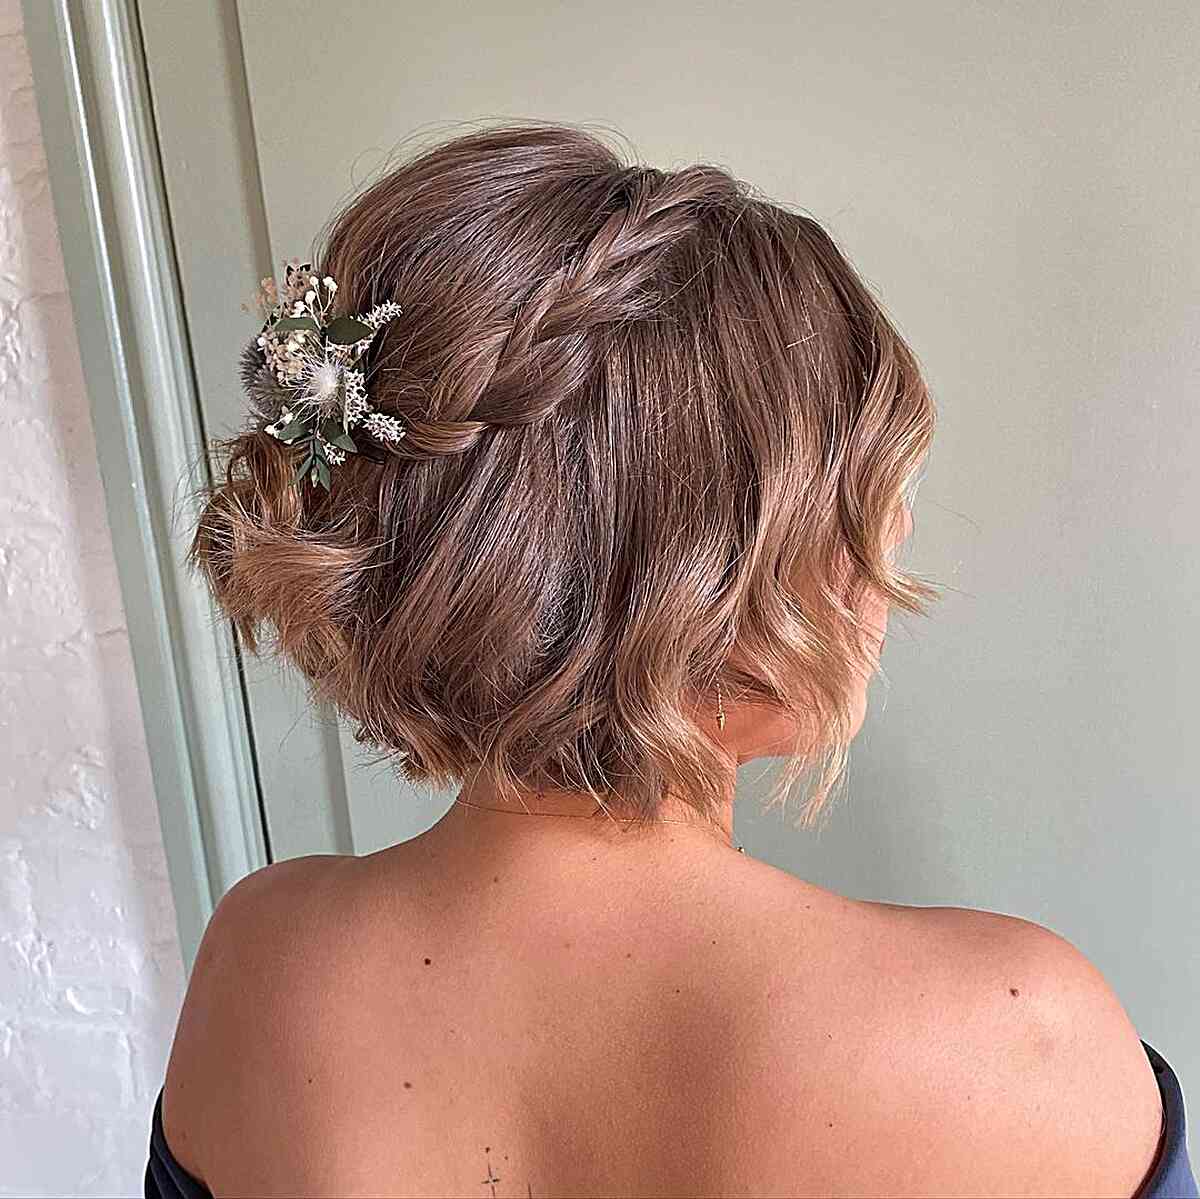 Soft Relaxed Wedding Hairstyles | Wedding Make Up And Hair Stylist London